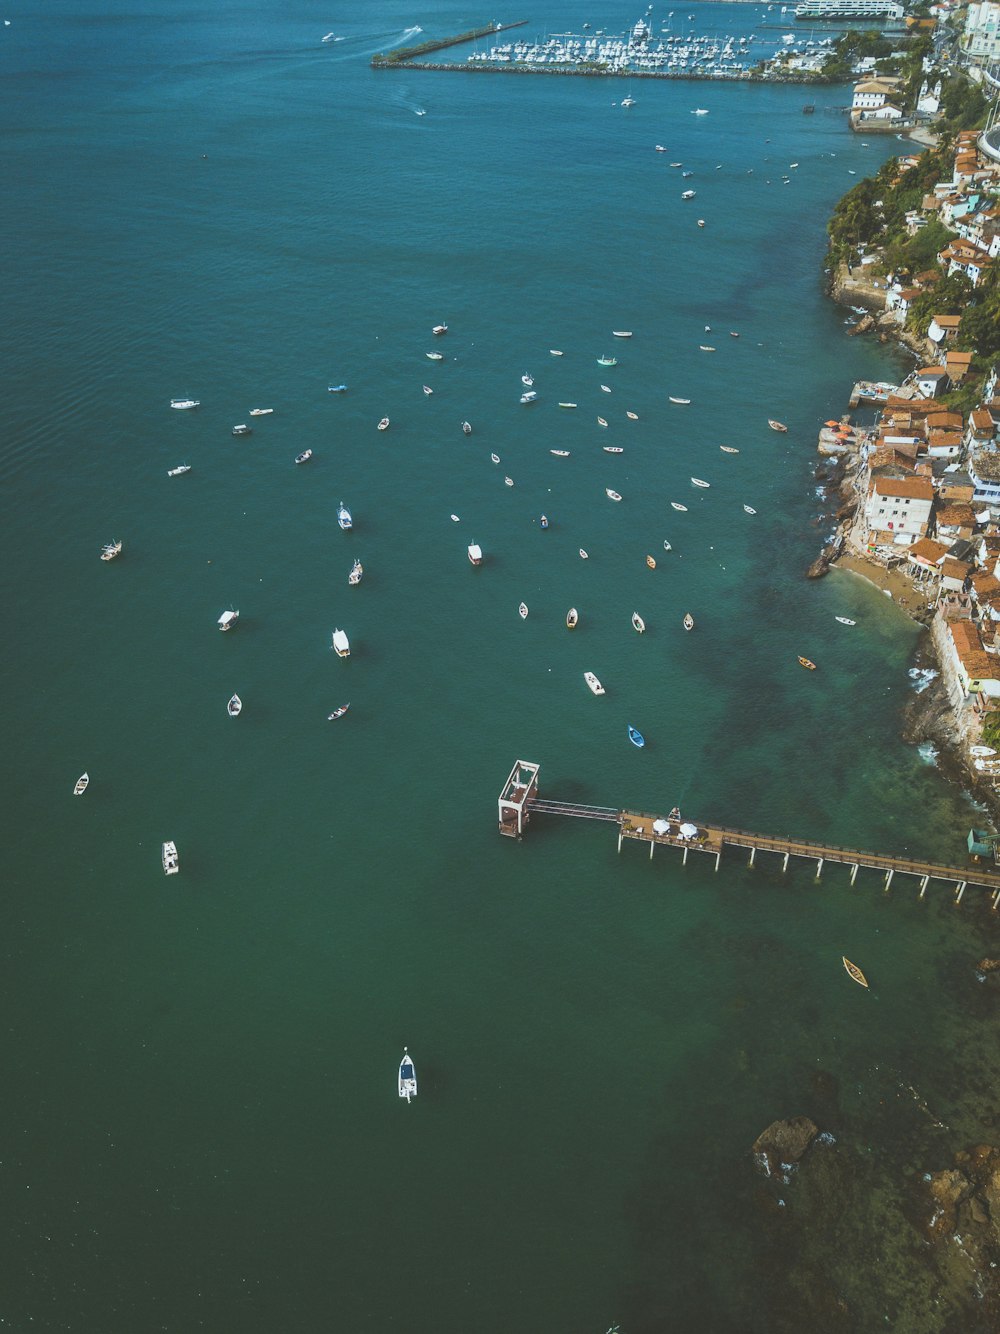 an aerial view of boats in the water near a pier